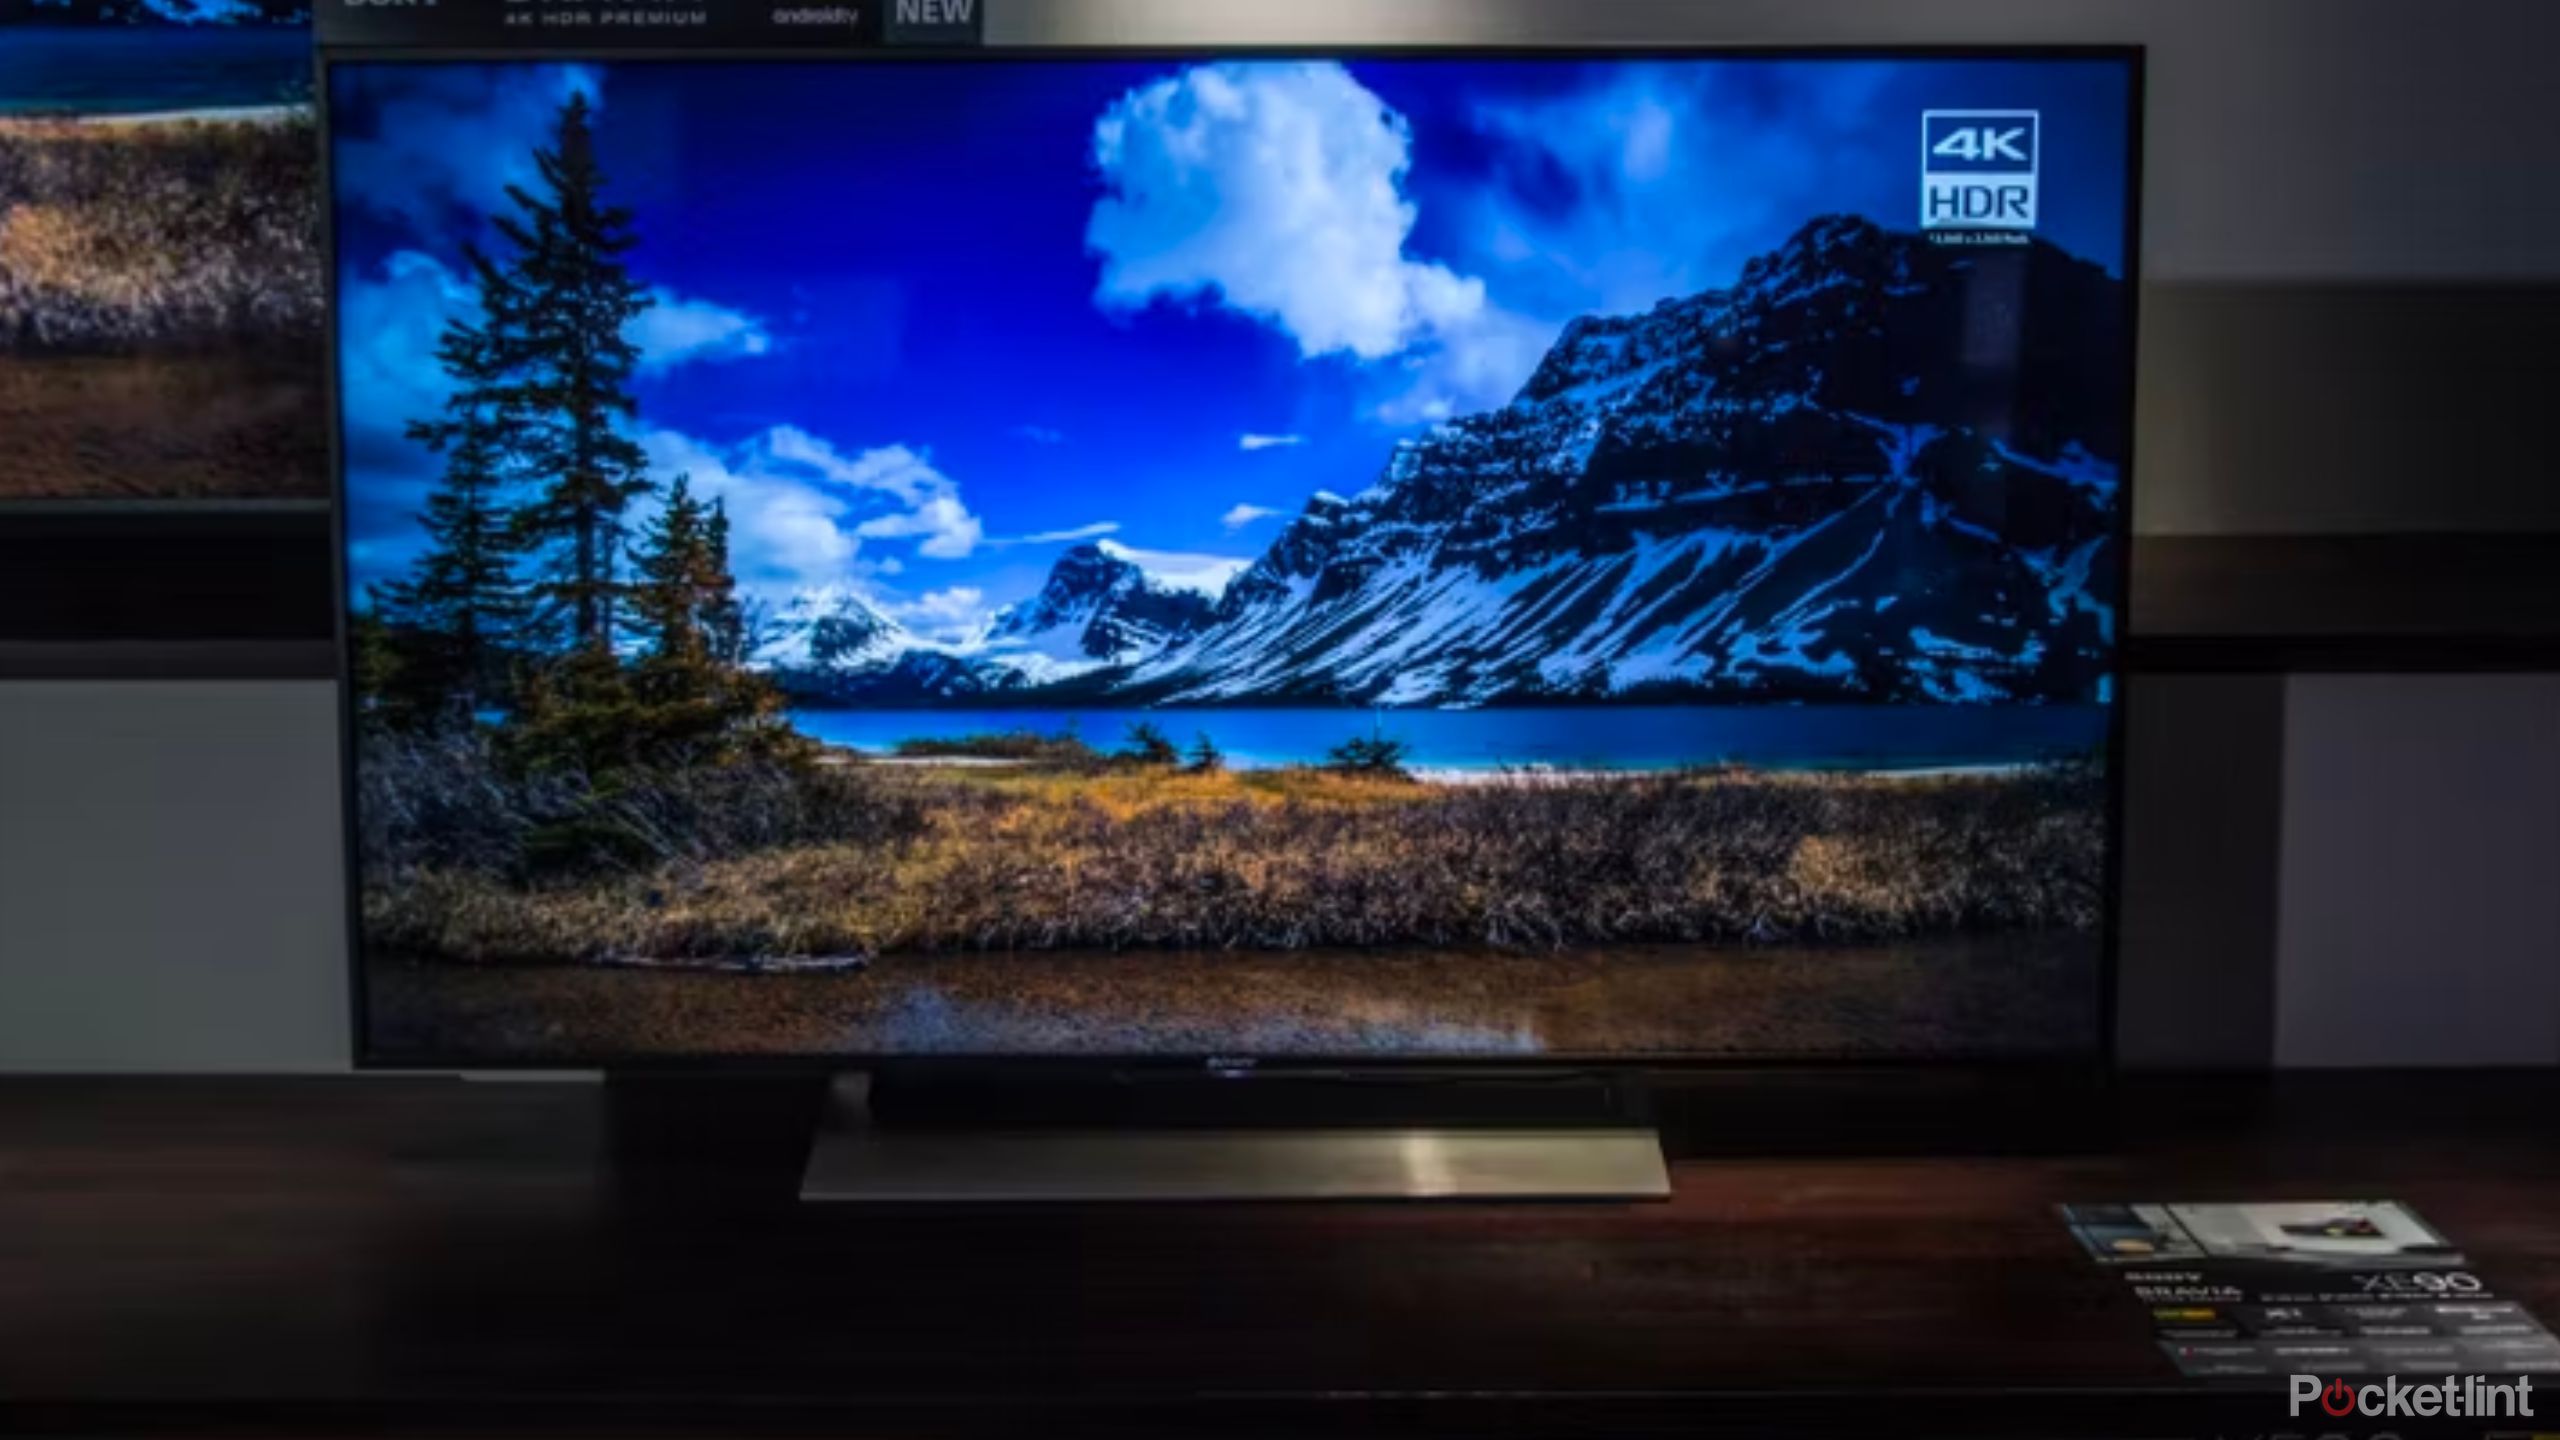 Sony 4k hdr tv featuring a snow capped mountain landscape. 